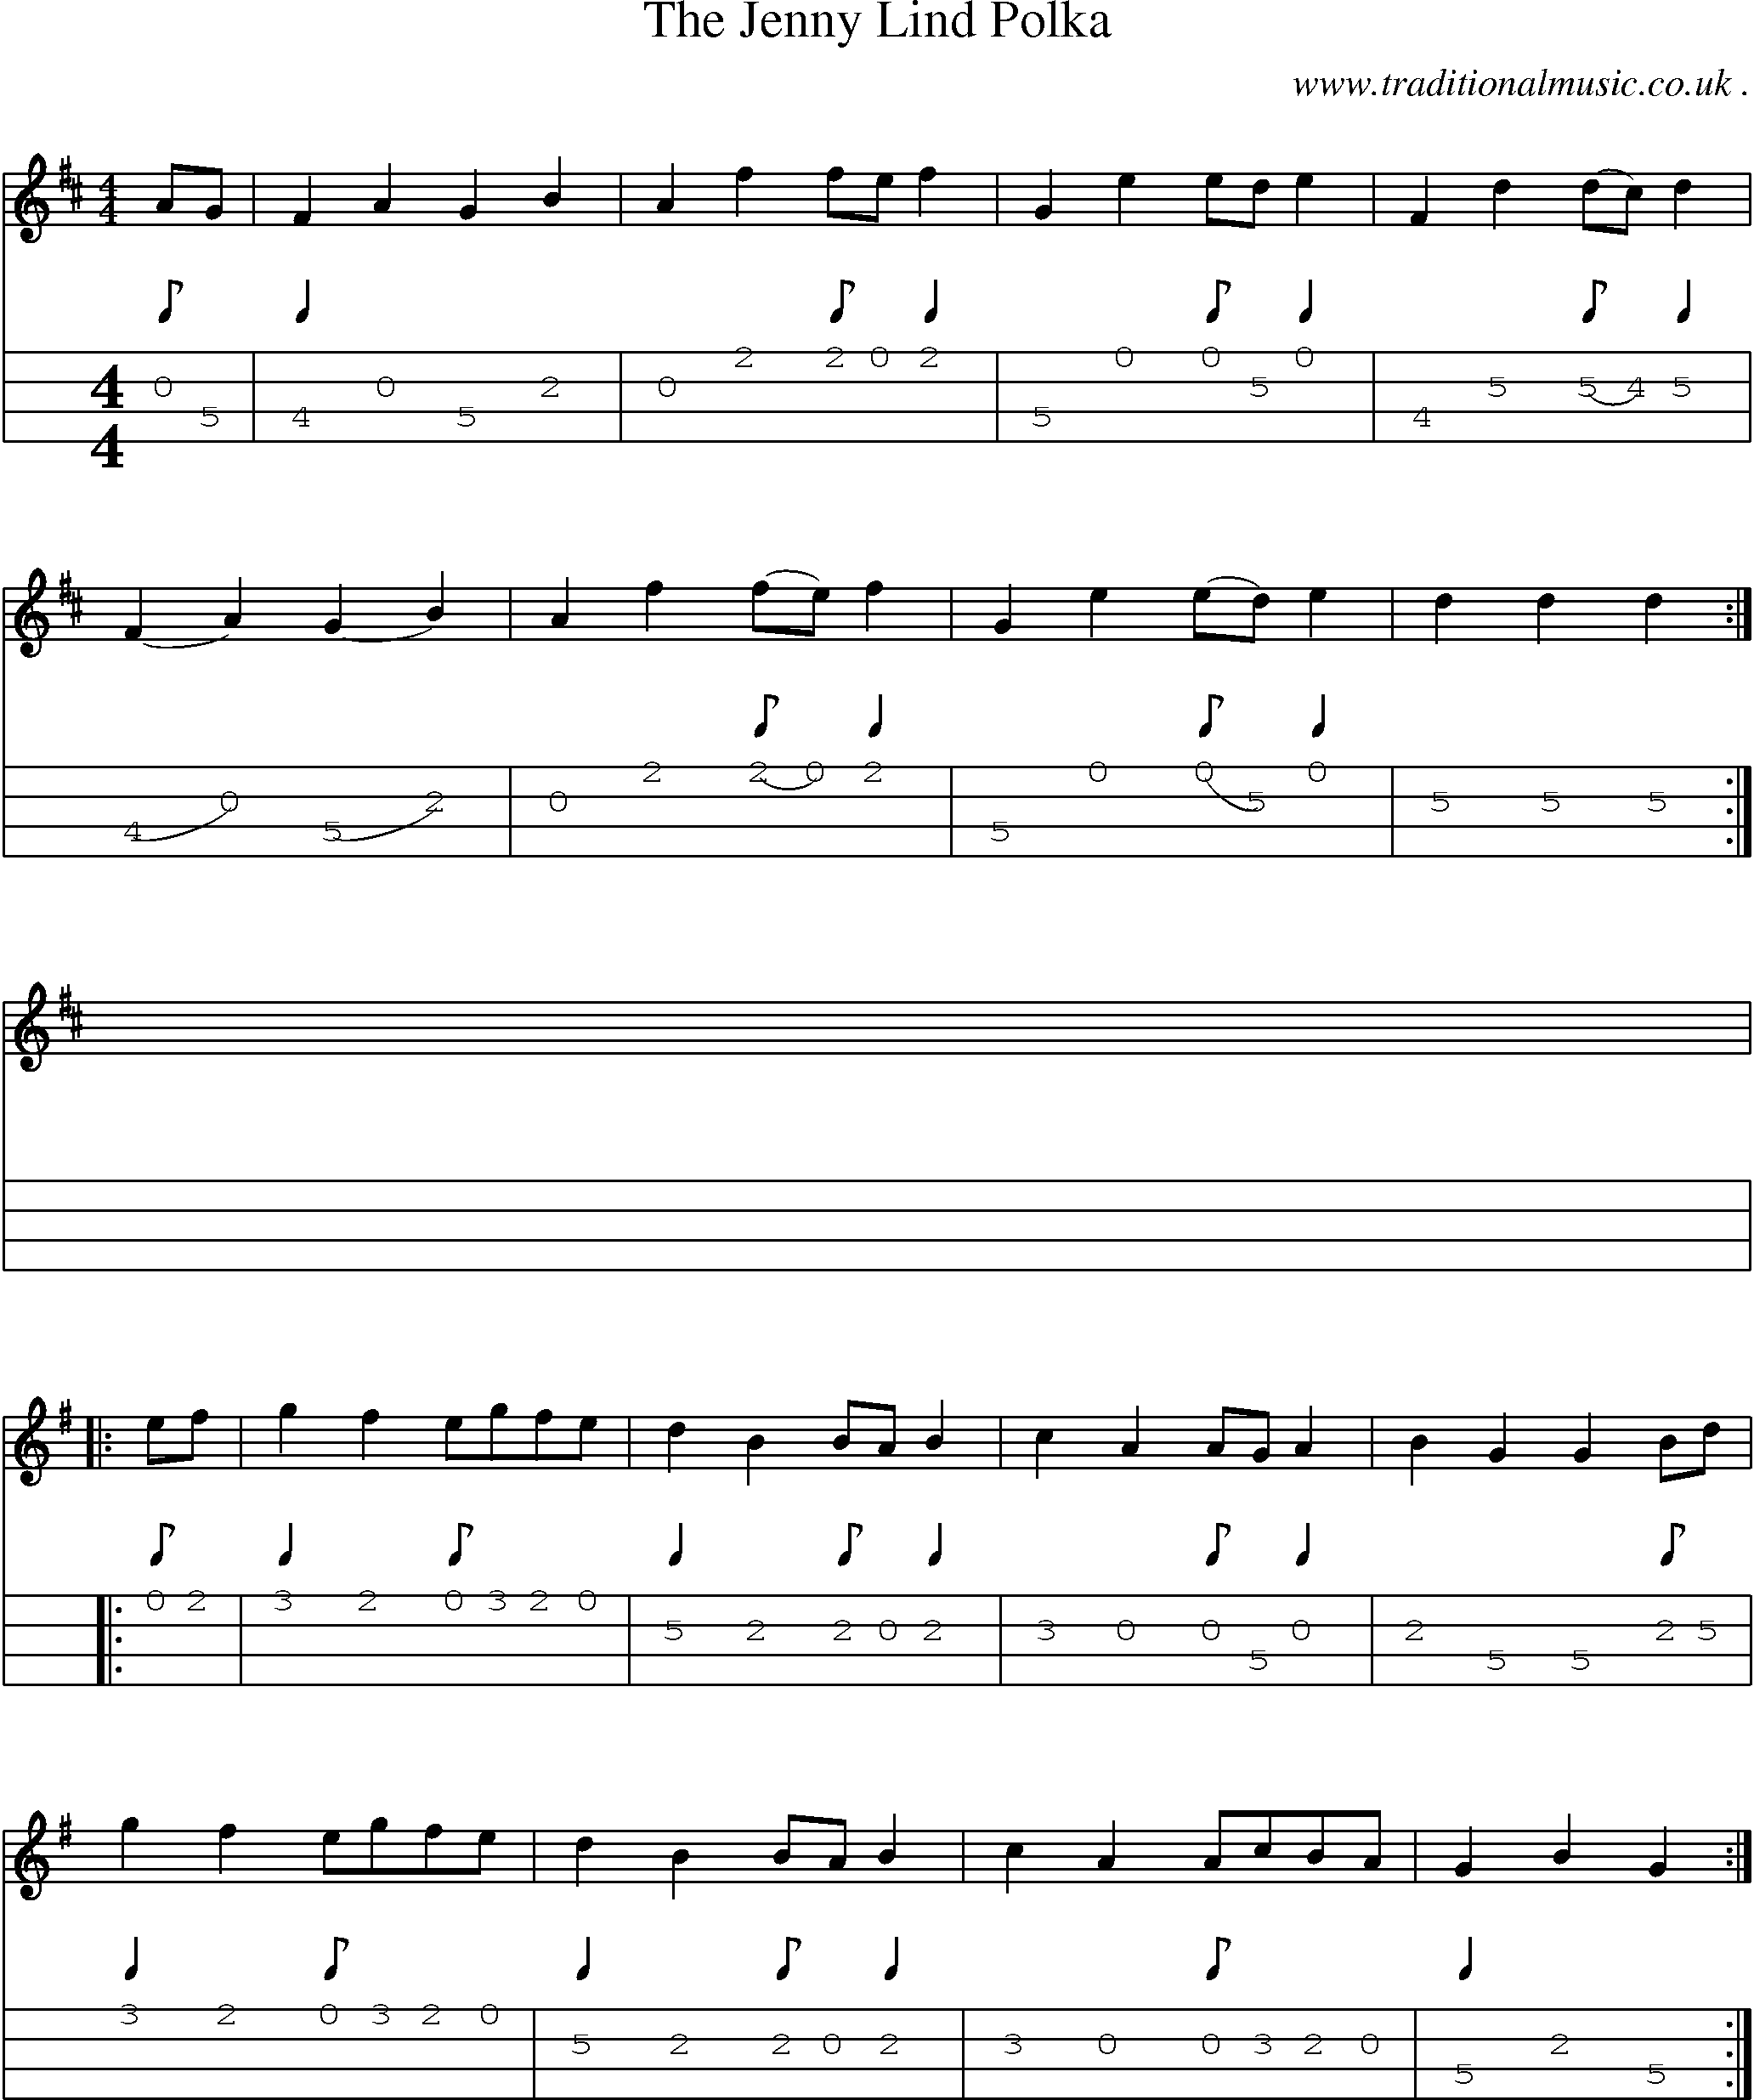 Sheet-Music and Mandolin Tabs for The Jenny Lind Polka